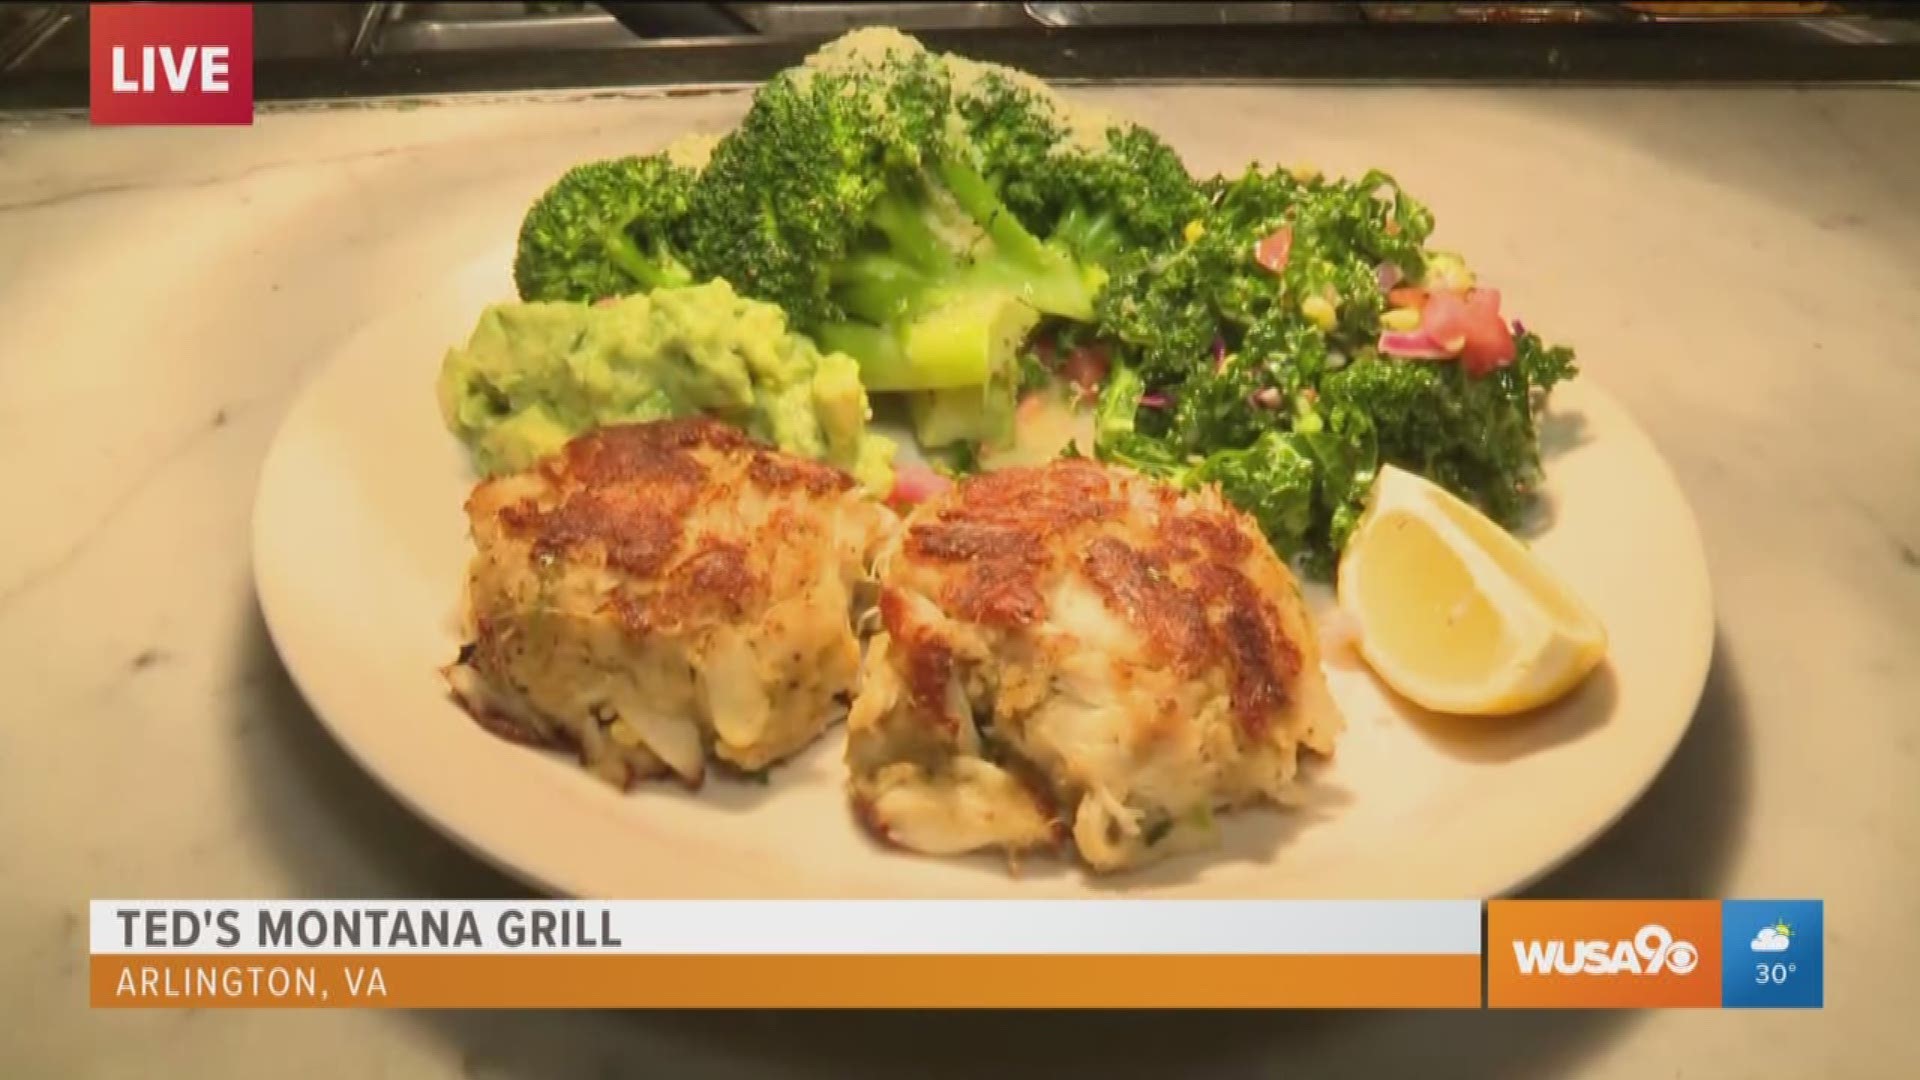 Field Correspondent Andi Hauser and Ted's Montana Grill Chef Daniel Araujo celebrate International Crab Cake Day coming up this Saturday. Chef Dan shows you how to give a southwestern flair to crab cakes. Plus, we learn how to make gluten free option.